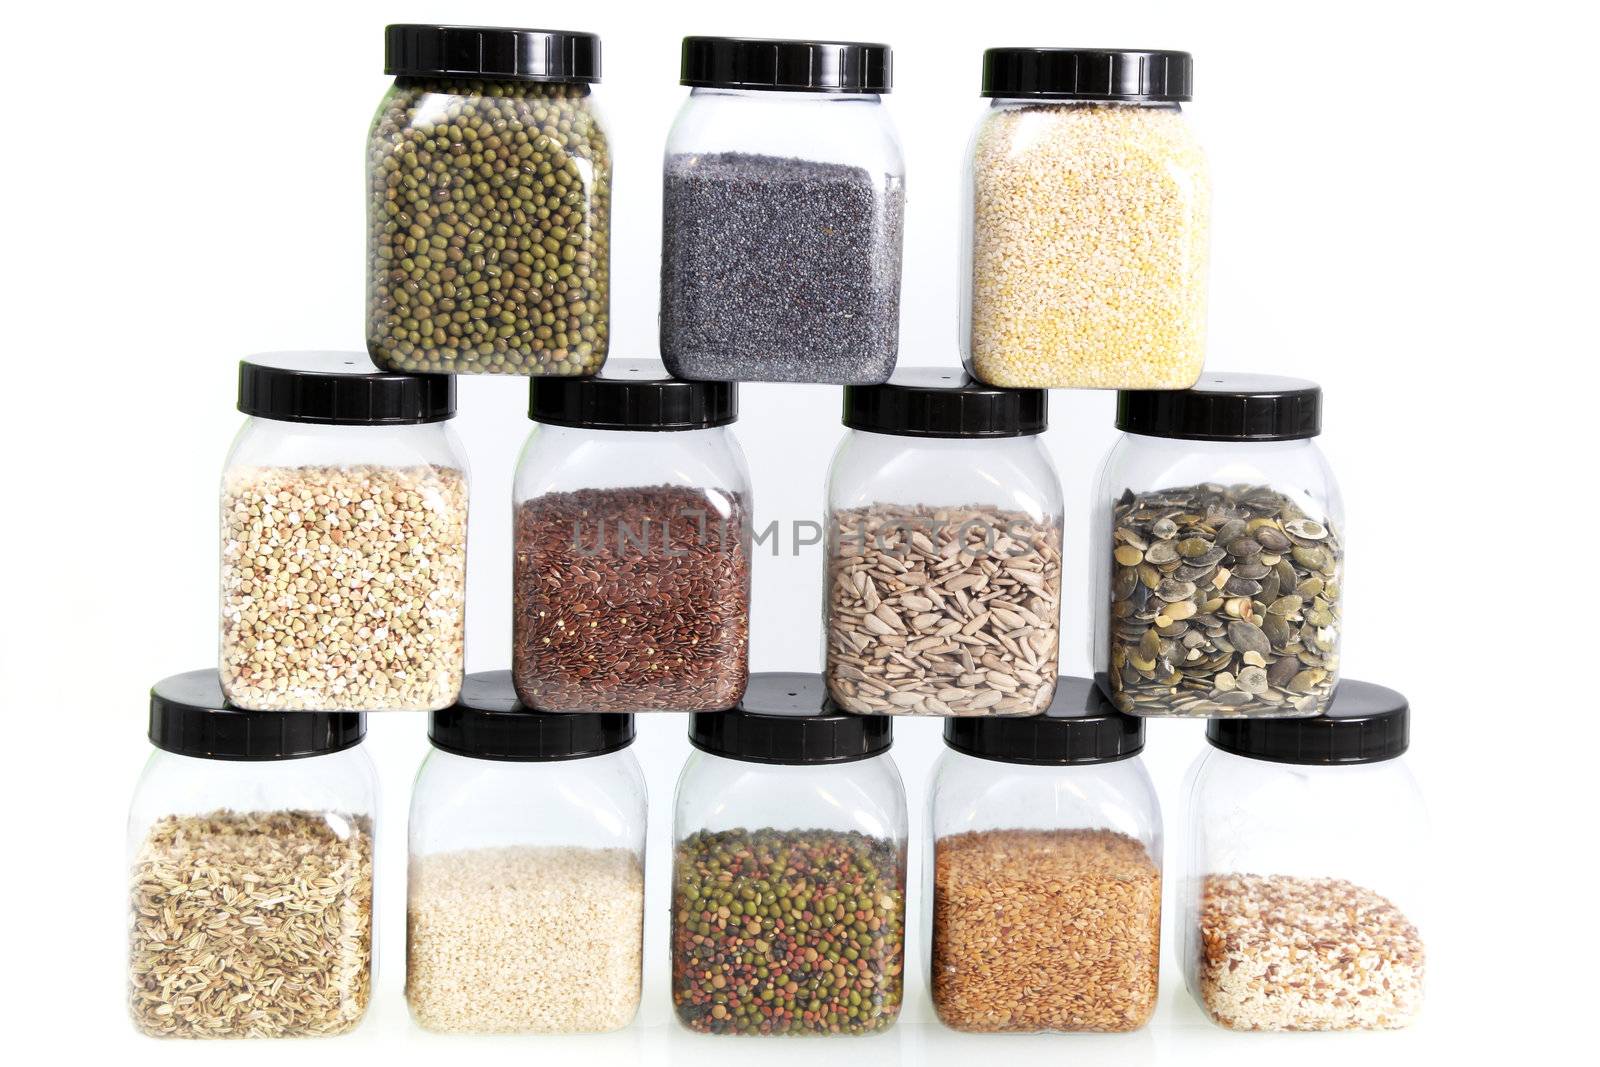 Display of a variety edible seeds in stacked rows of individual glass jars including whole and dehusked sunflower, sesame, poppy, linseed, rice, pulses and legumes isolated on white